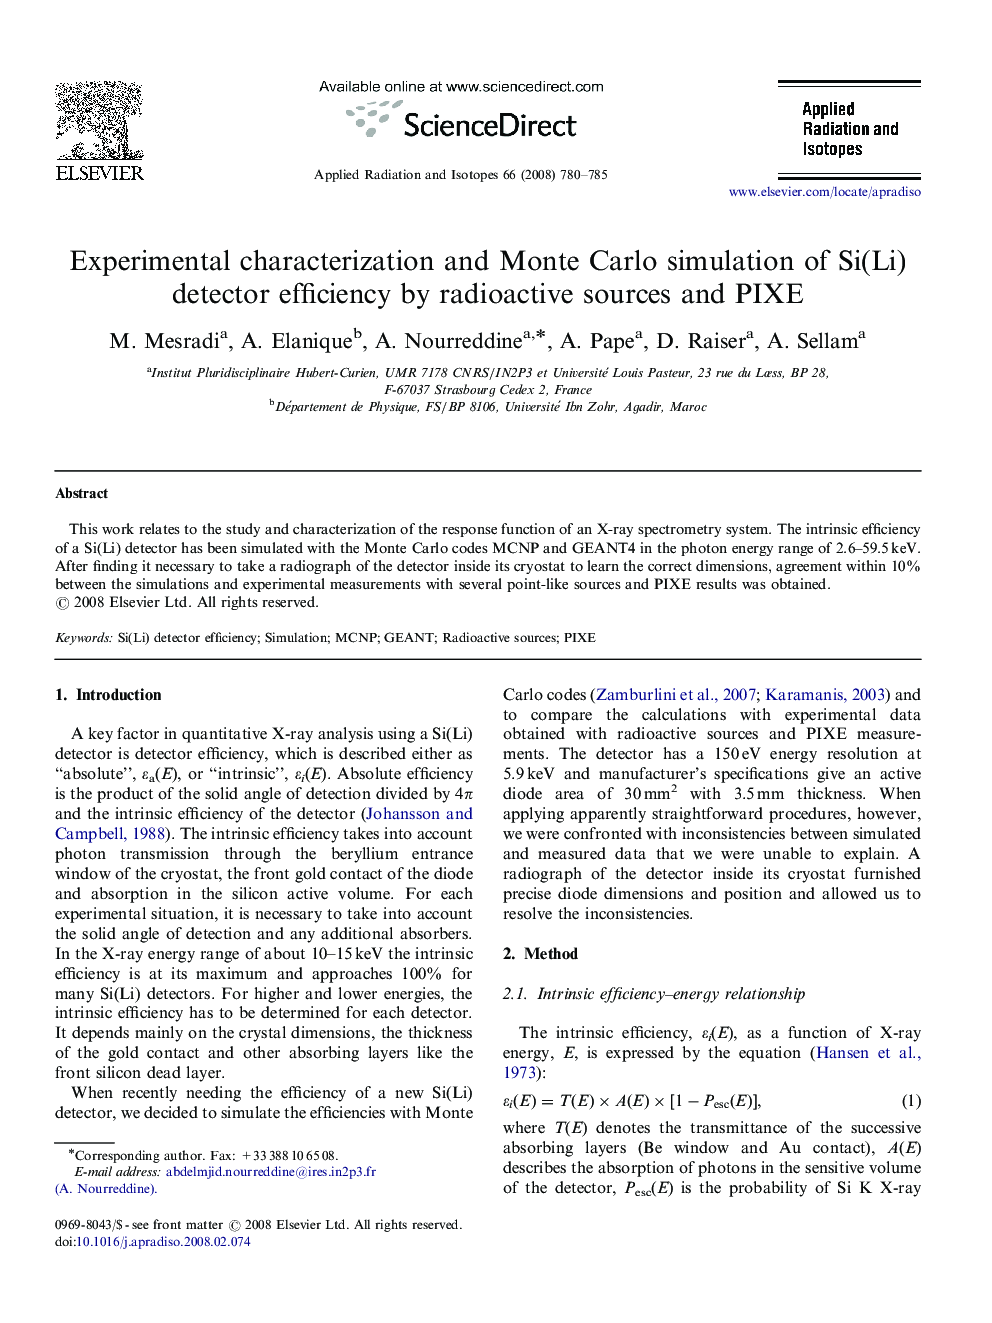 Experimental characterization and Monte Carlo simulation of Si(Li) detector efficiency by radioactive sources and PIXE